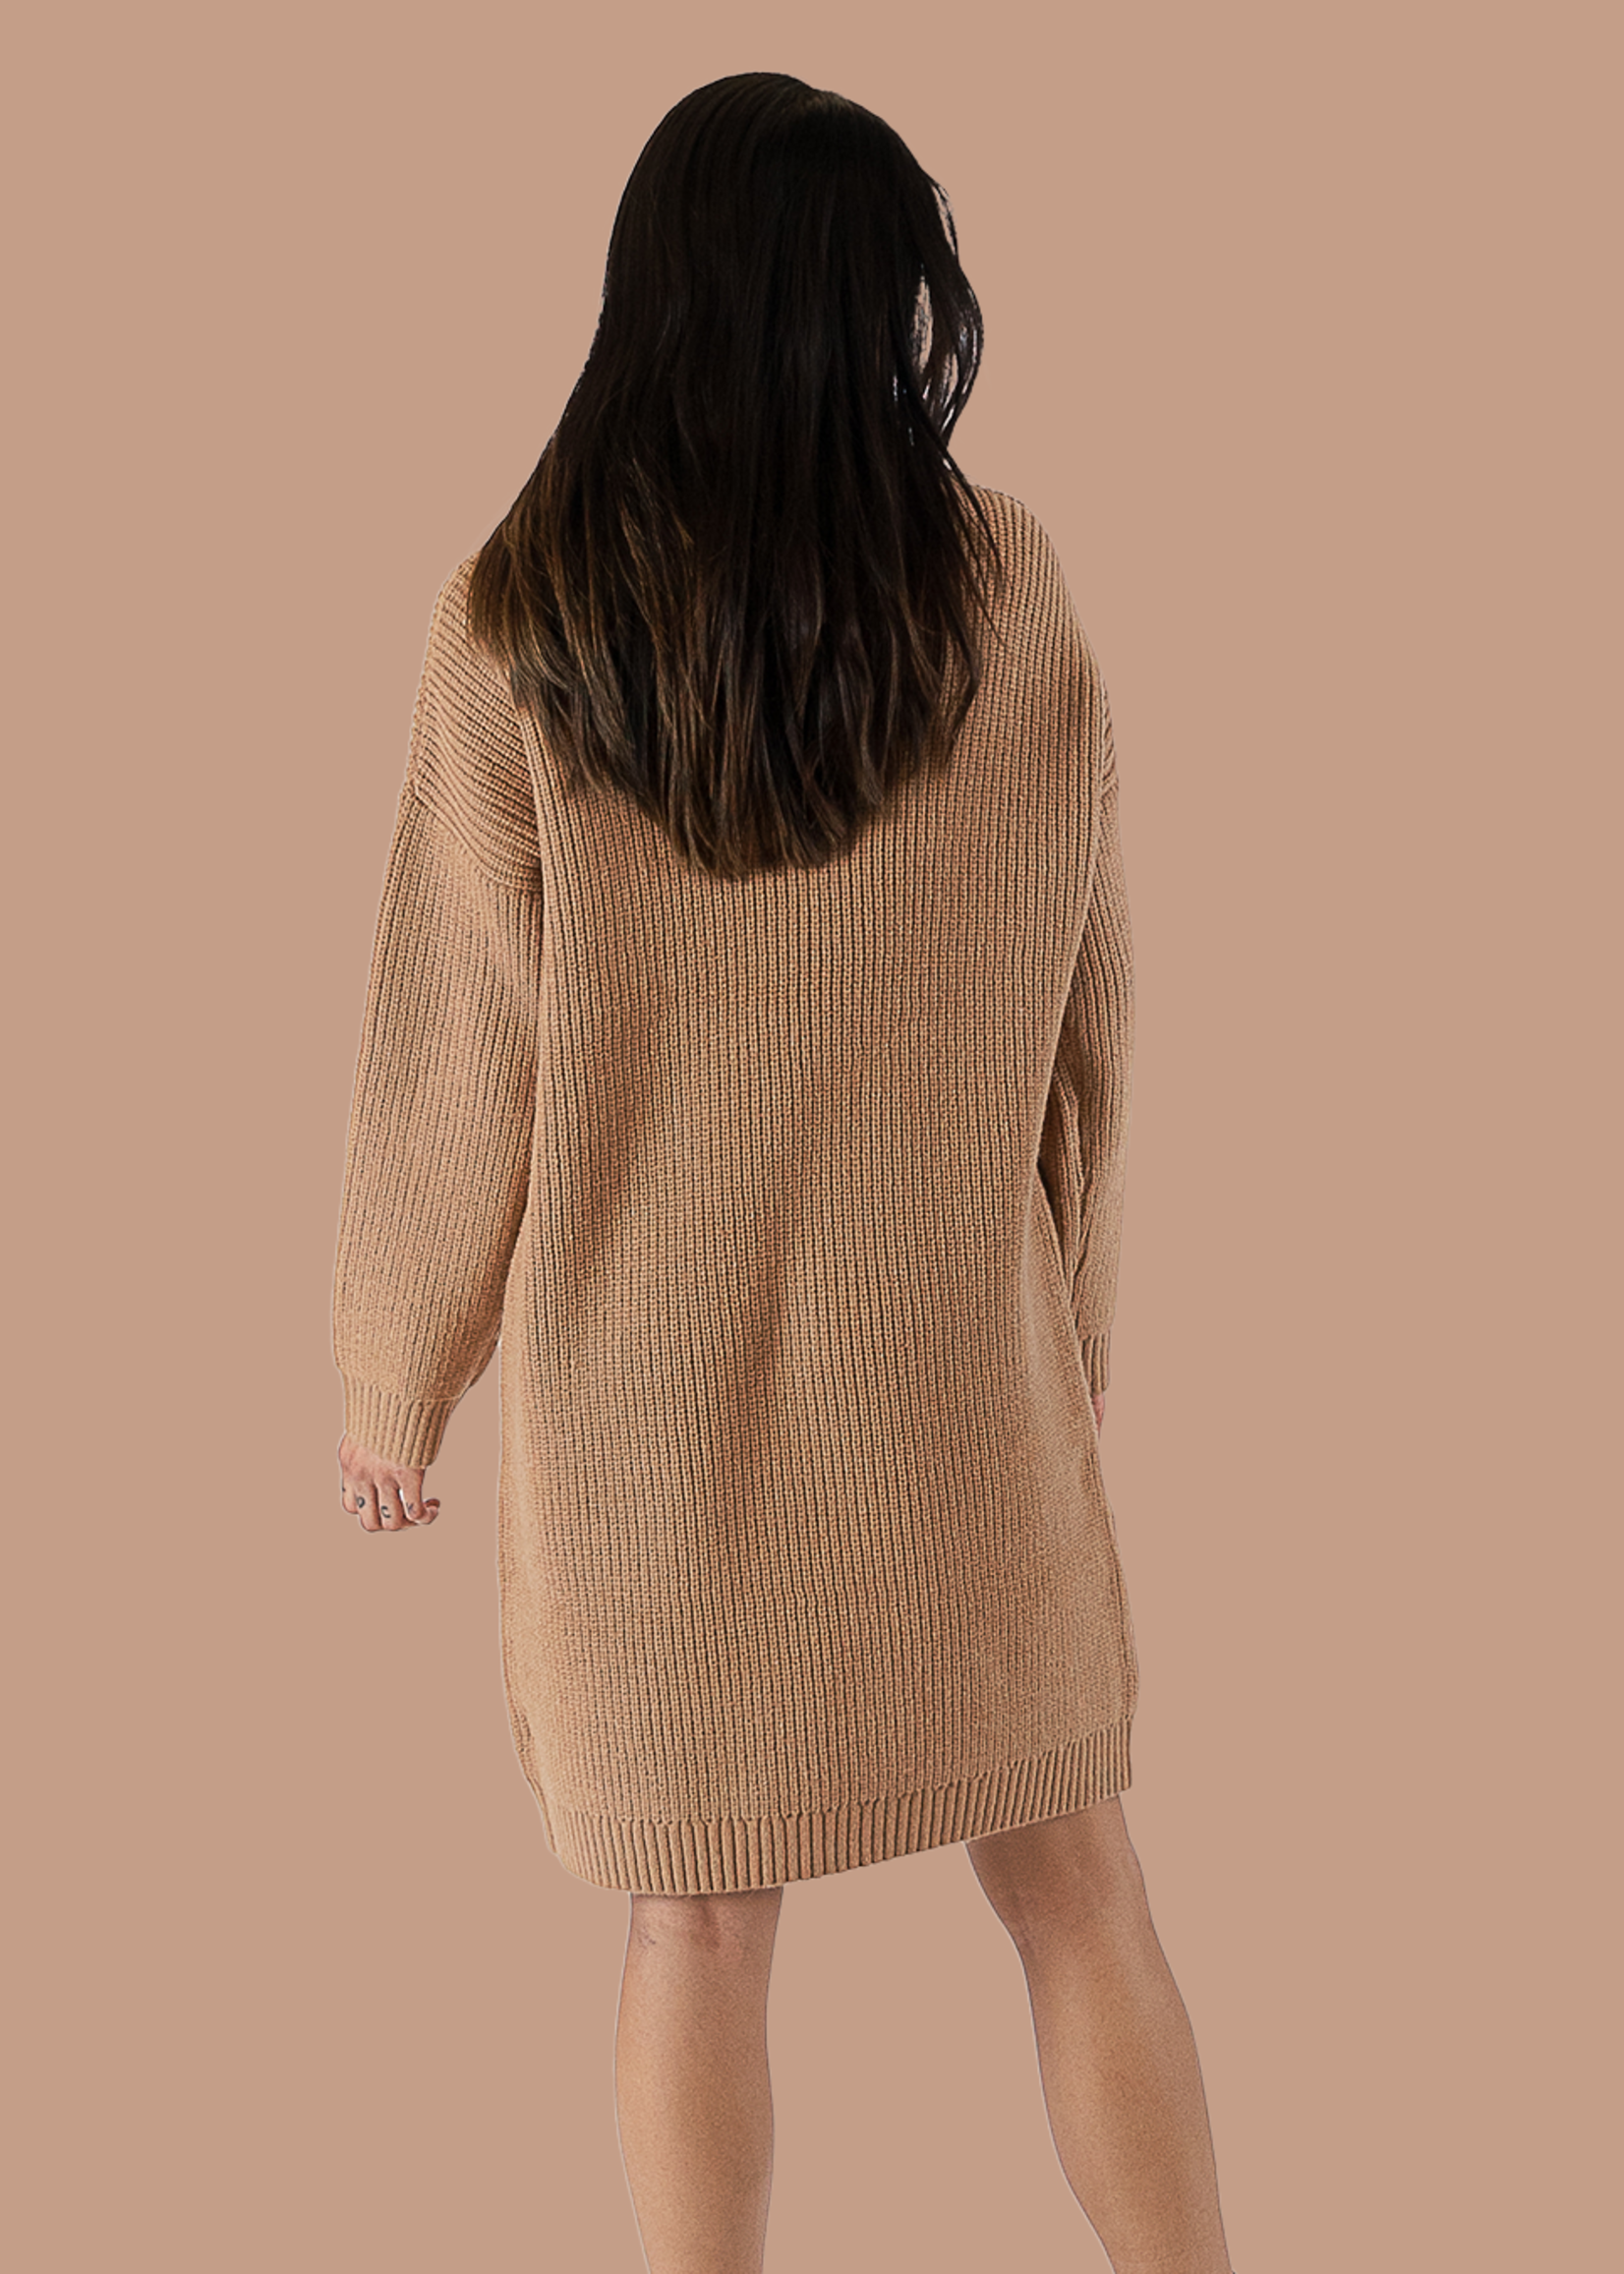 Betty Ribbed Dress in Camel